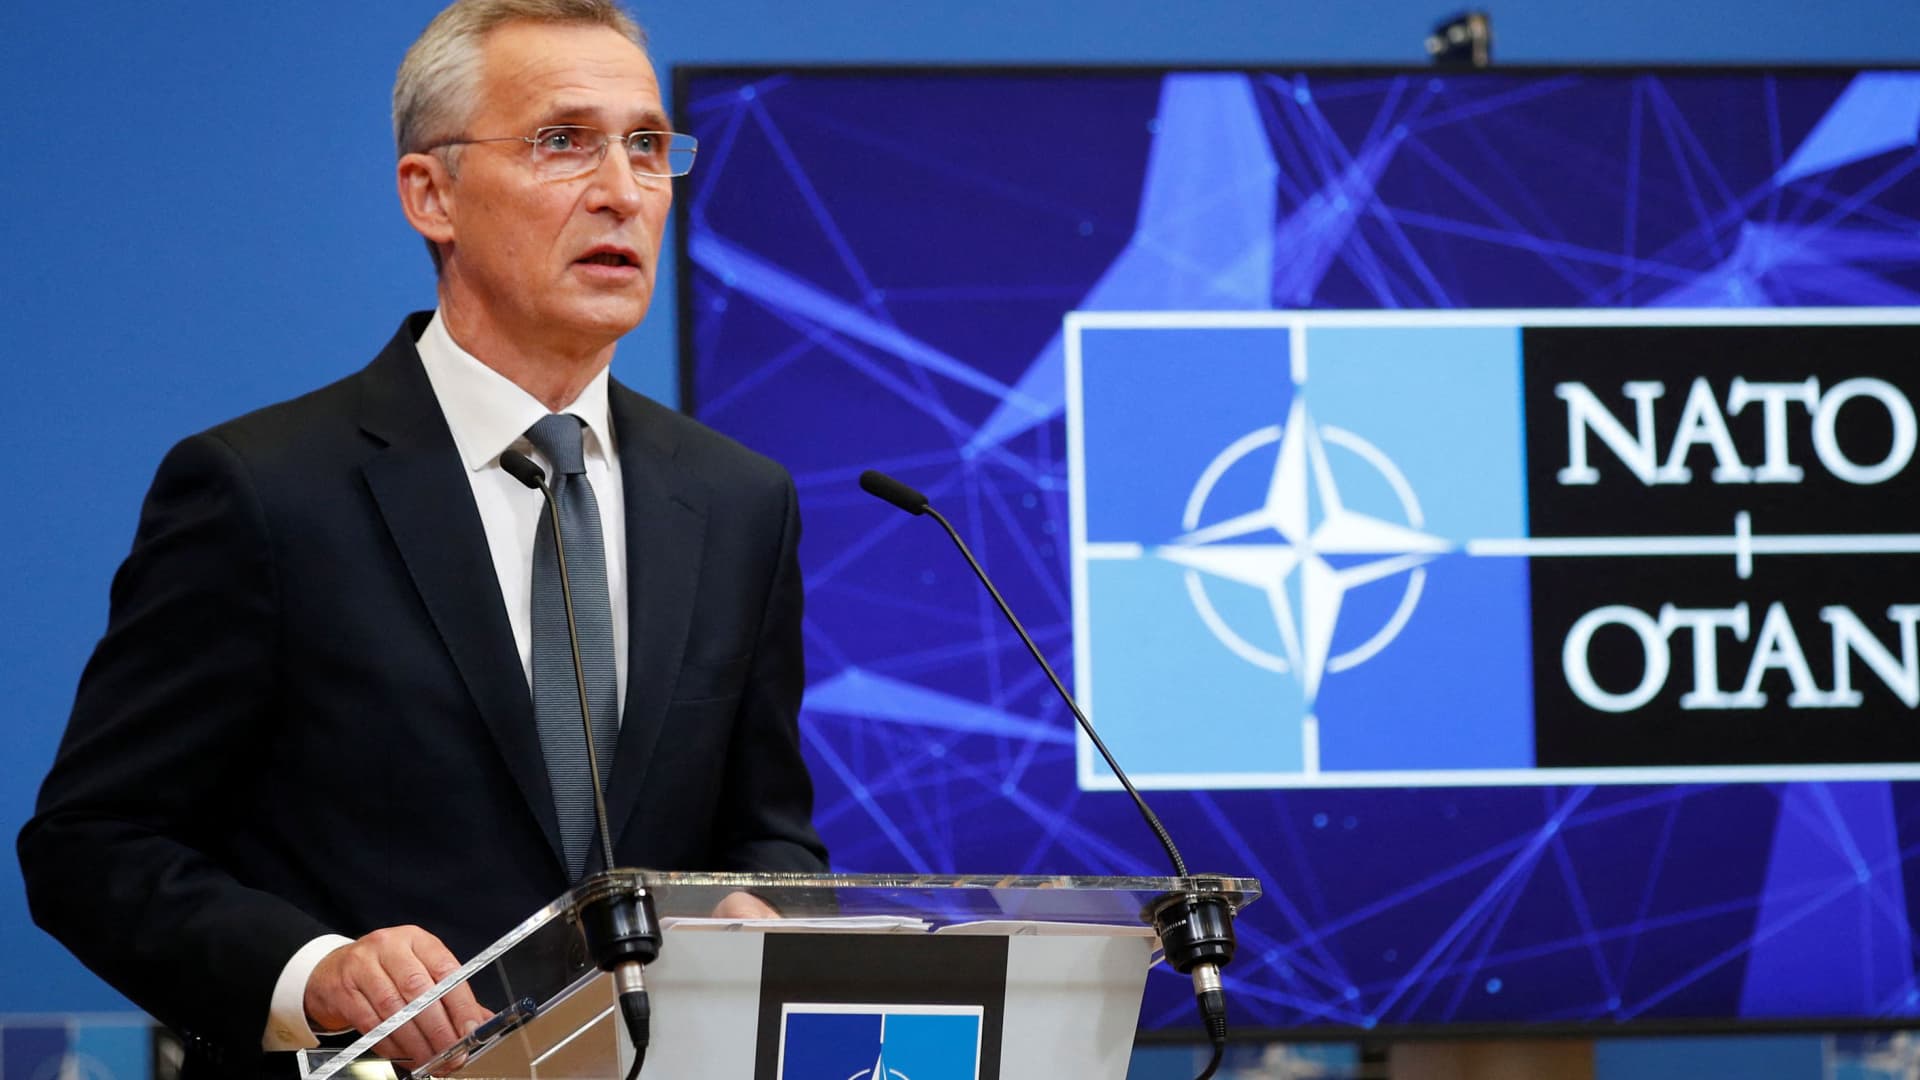 NATO Secretary General Jens Stoltenberg speaks during a news conference at the Alliance's headquarters in Brussels, Belgium January 7, 2022.